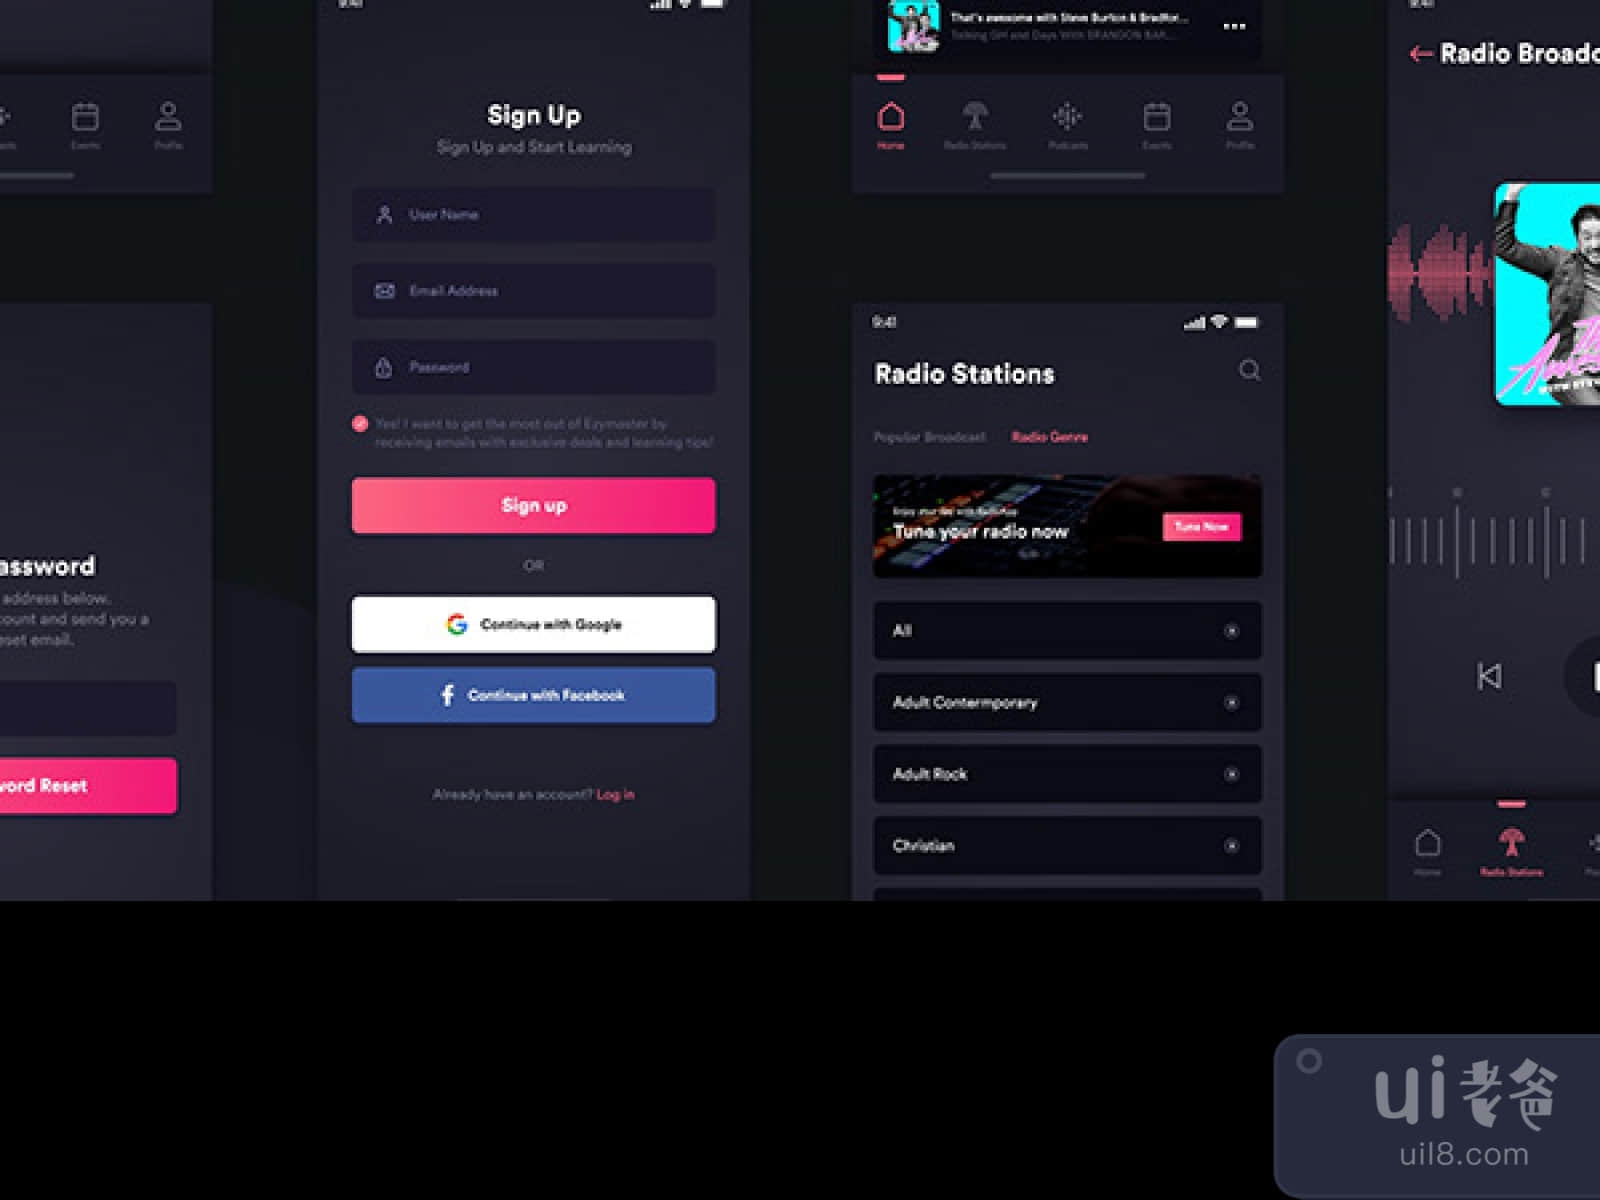 Podcast App free UI kit for Figma and Adobe XD No 1